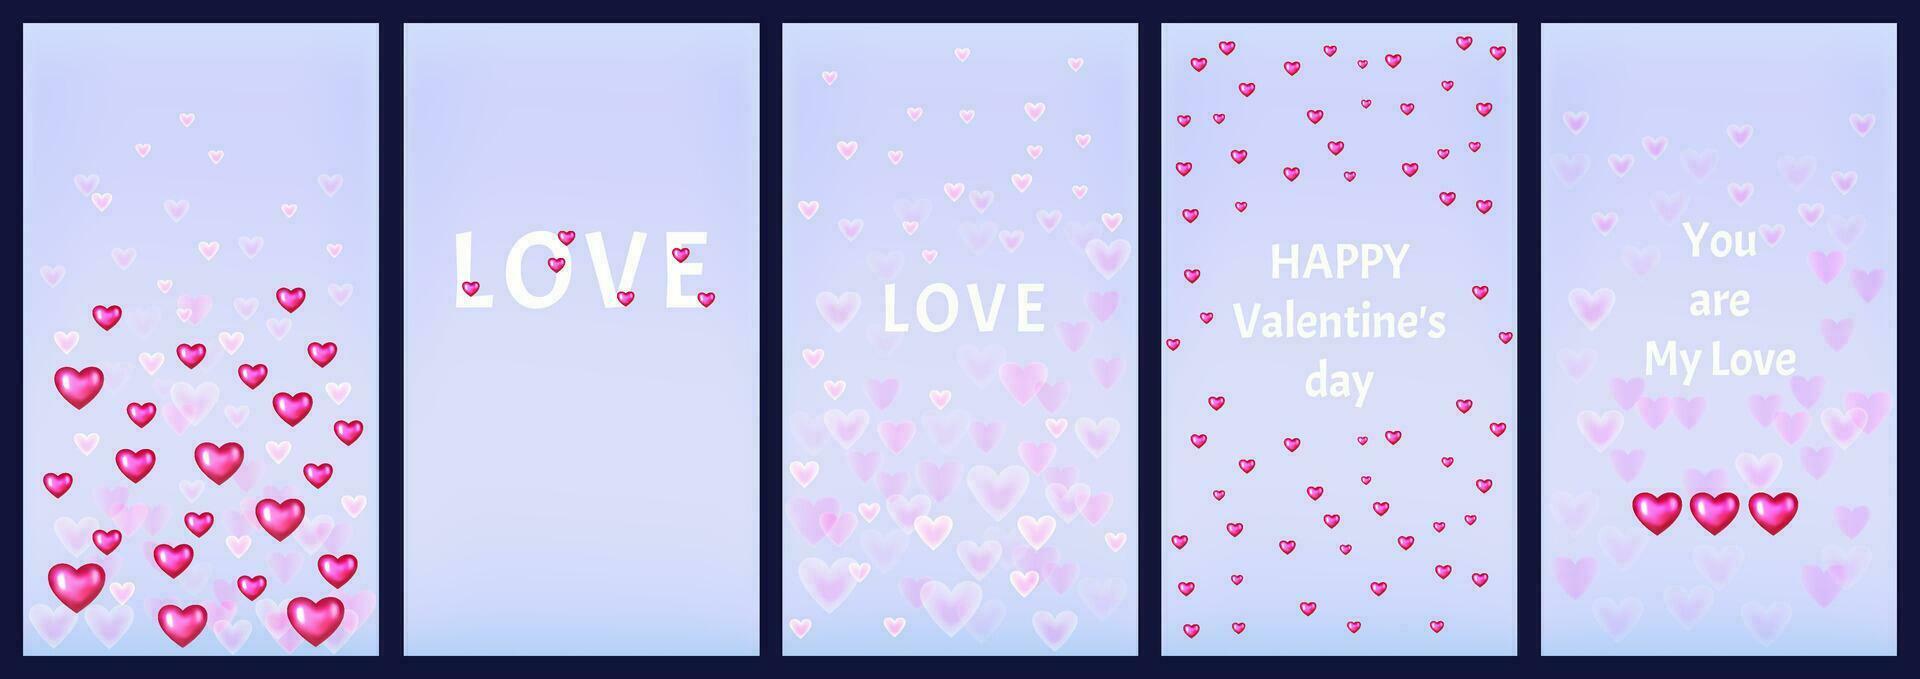 Stories templates. Set templates Happy Valentine day, love, you are my love. Set o hearts. Graphics suitable f festive vector templates withfor use for banner, print flyer, decorative